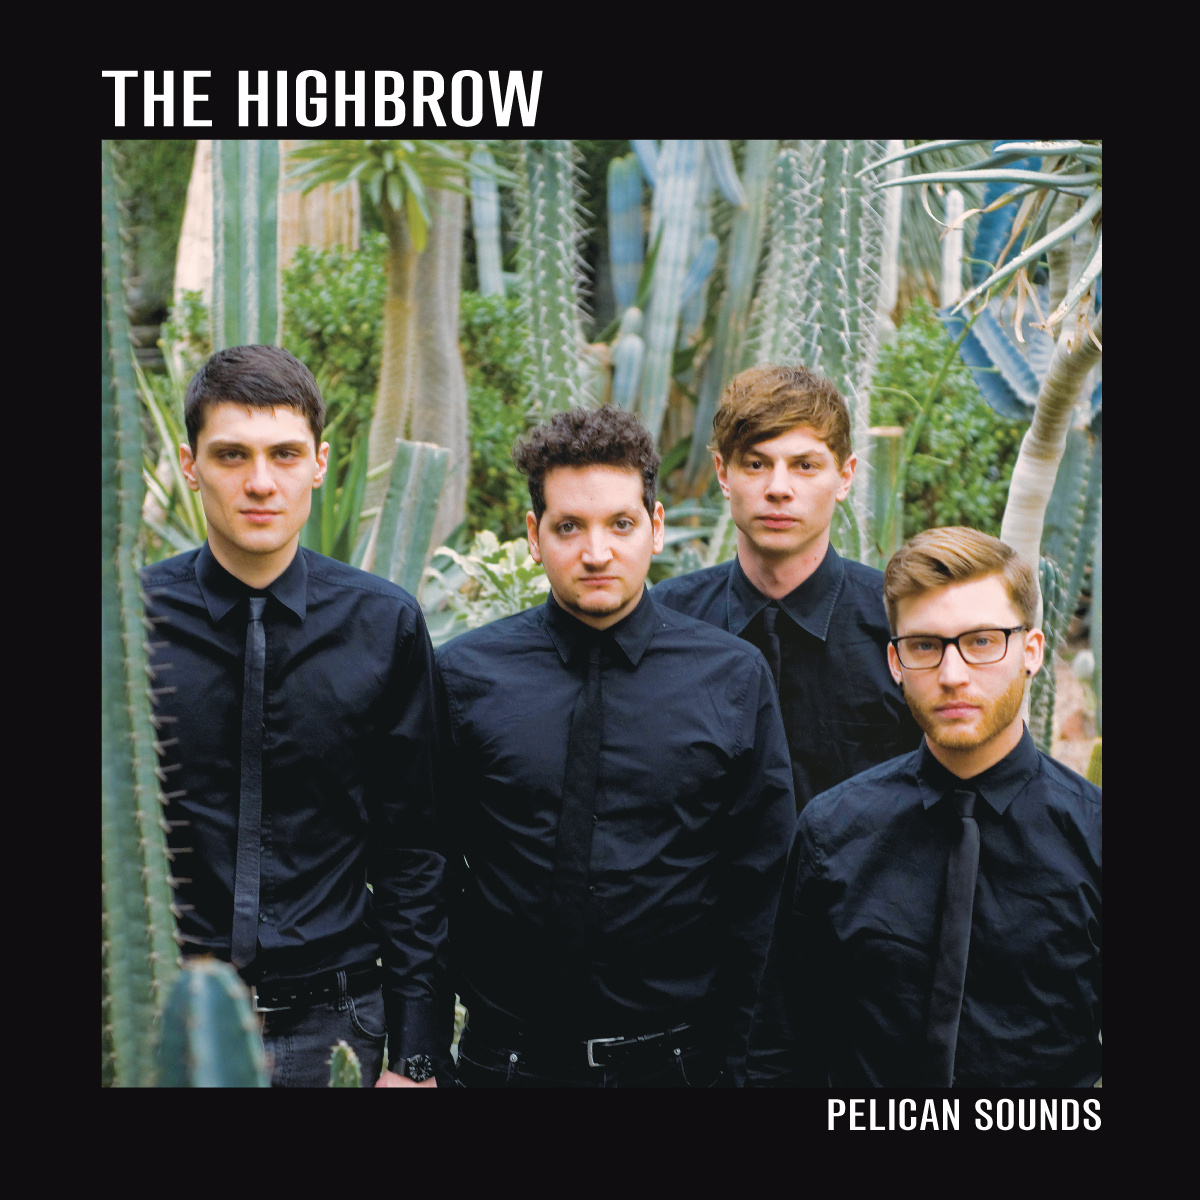 The Highbrow – Pelican Sounds